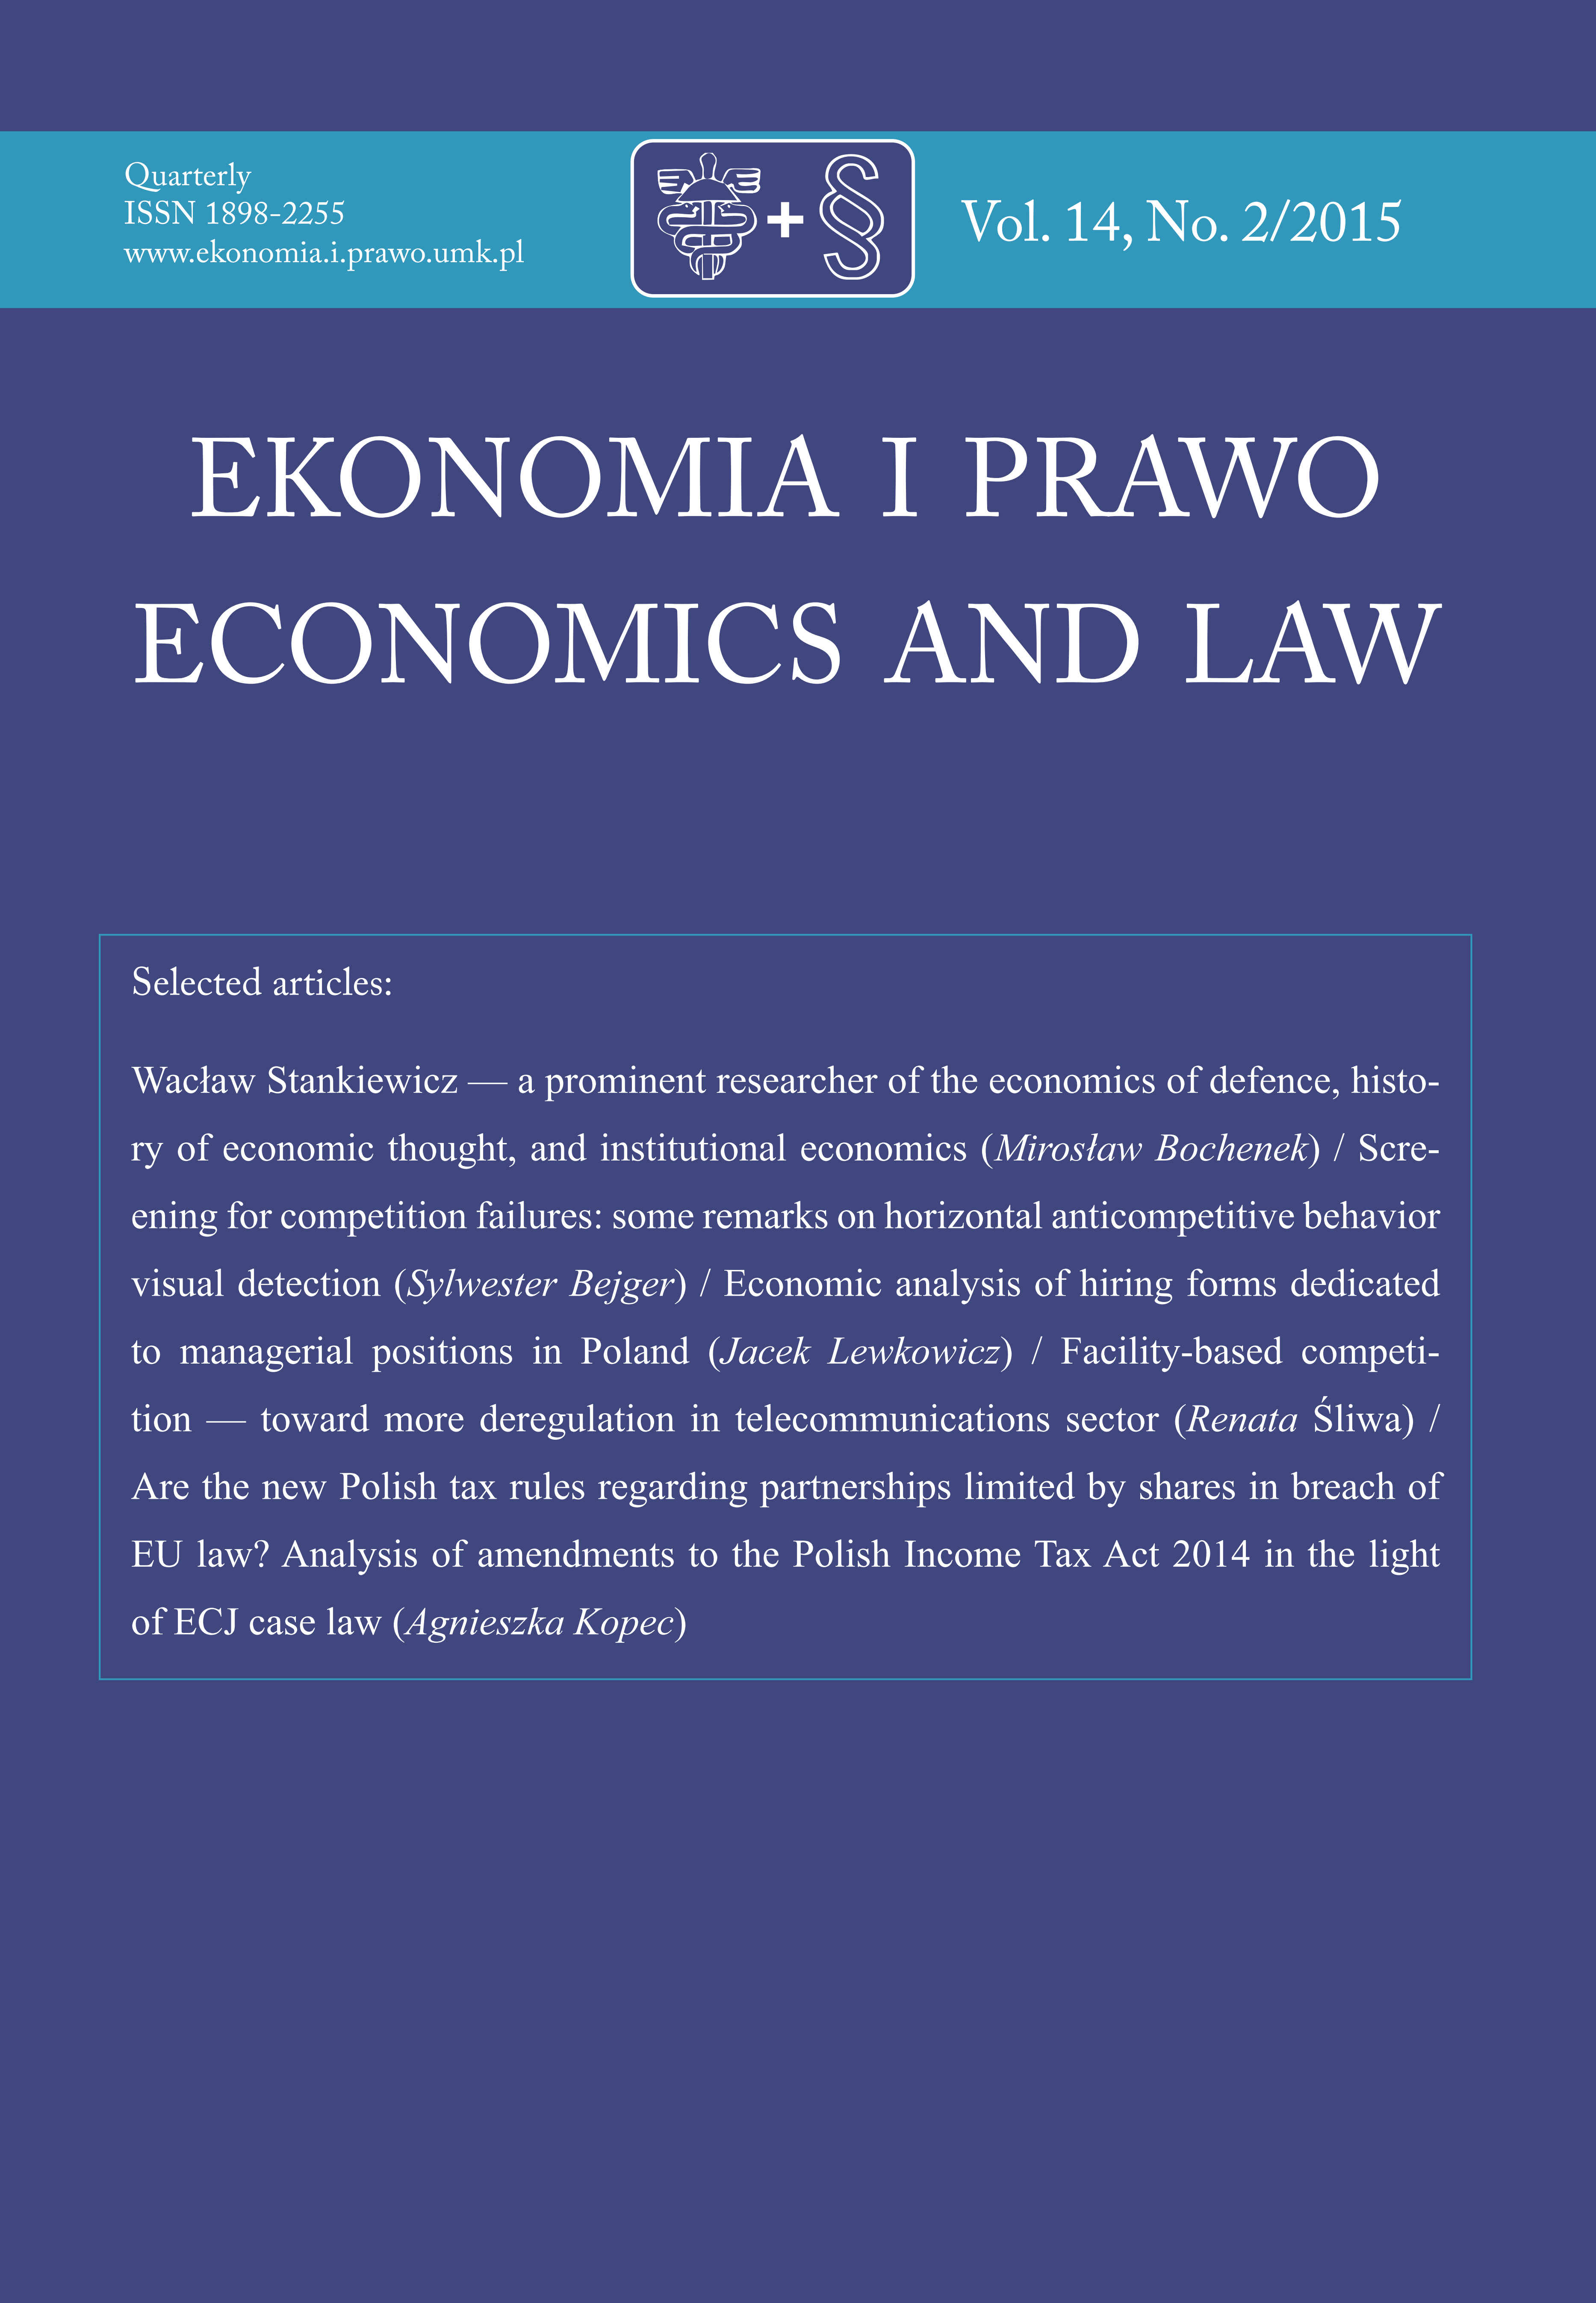 WACŁAW STANKIEWICZ — A PROMINENT RESEARCHER OF THE ECONOMICS OF DEFENCE, HISTORY OF ECONOMIC THOUGHT, AND INSTITUTIONAL ECONOMICS Cover Image